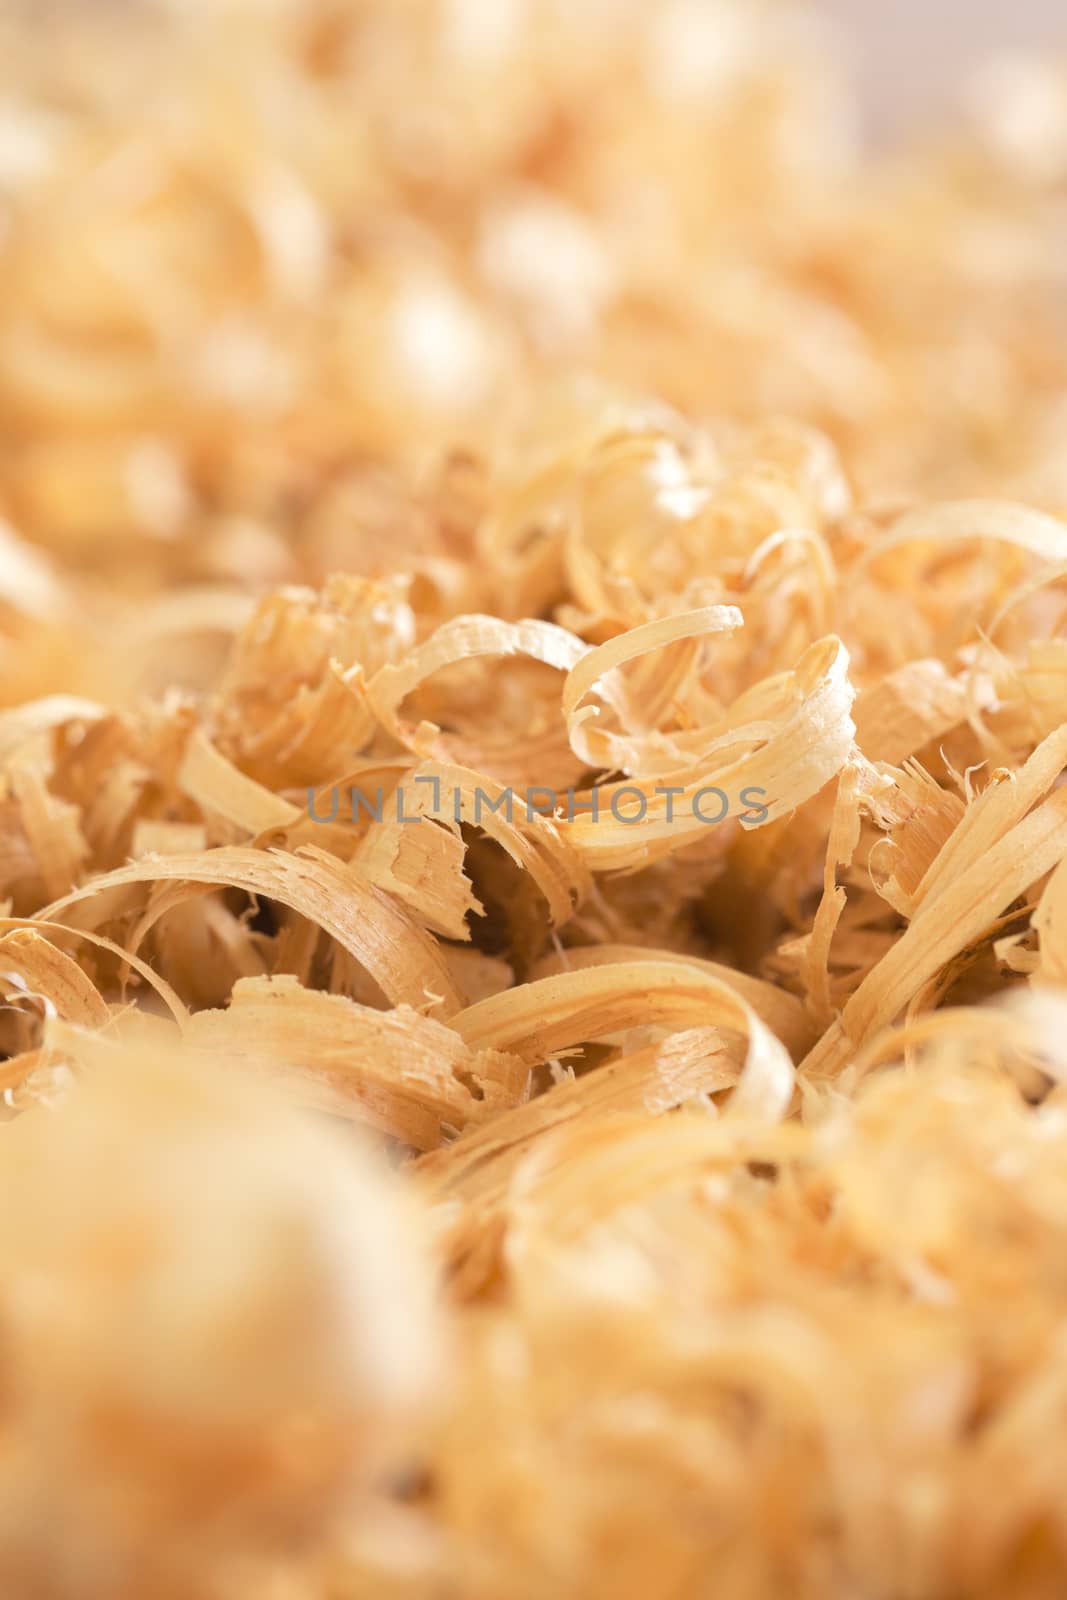 Close up view on wood shavings.